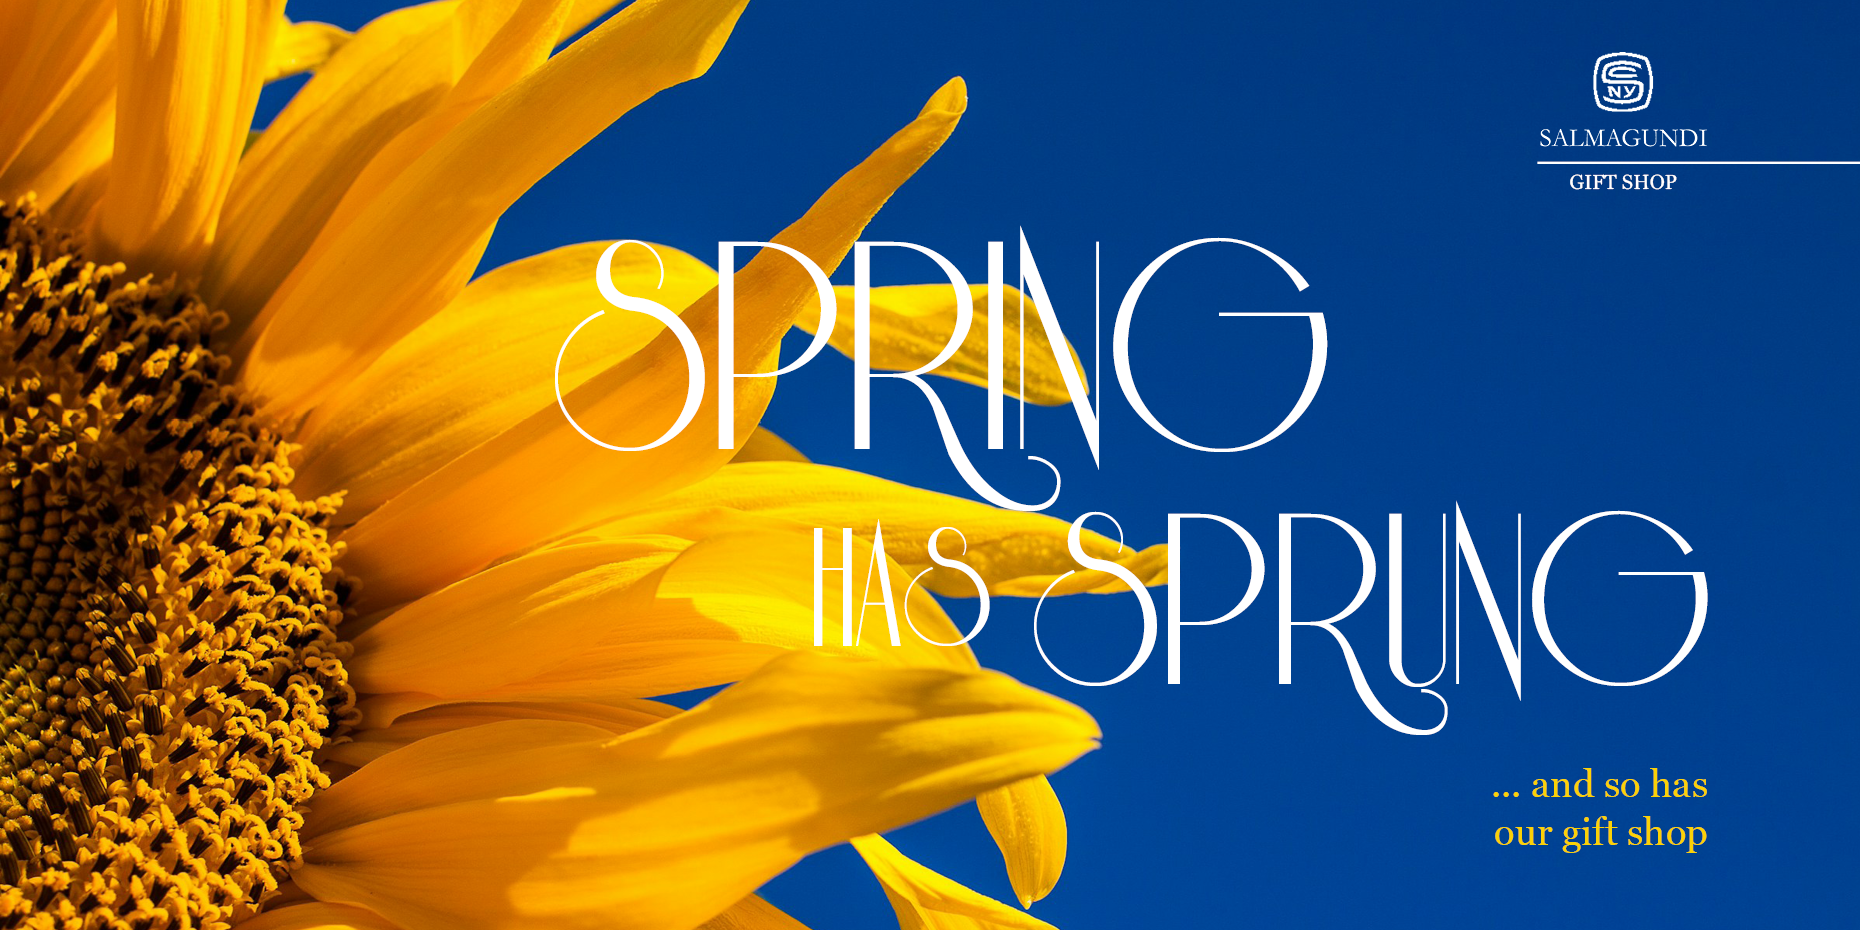 A vibrant sunflower with text overlay announcing "spring has sprung" advertises the opening of a gift shop.